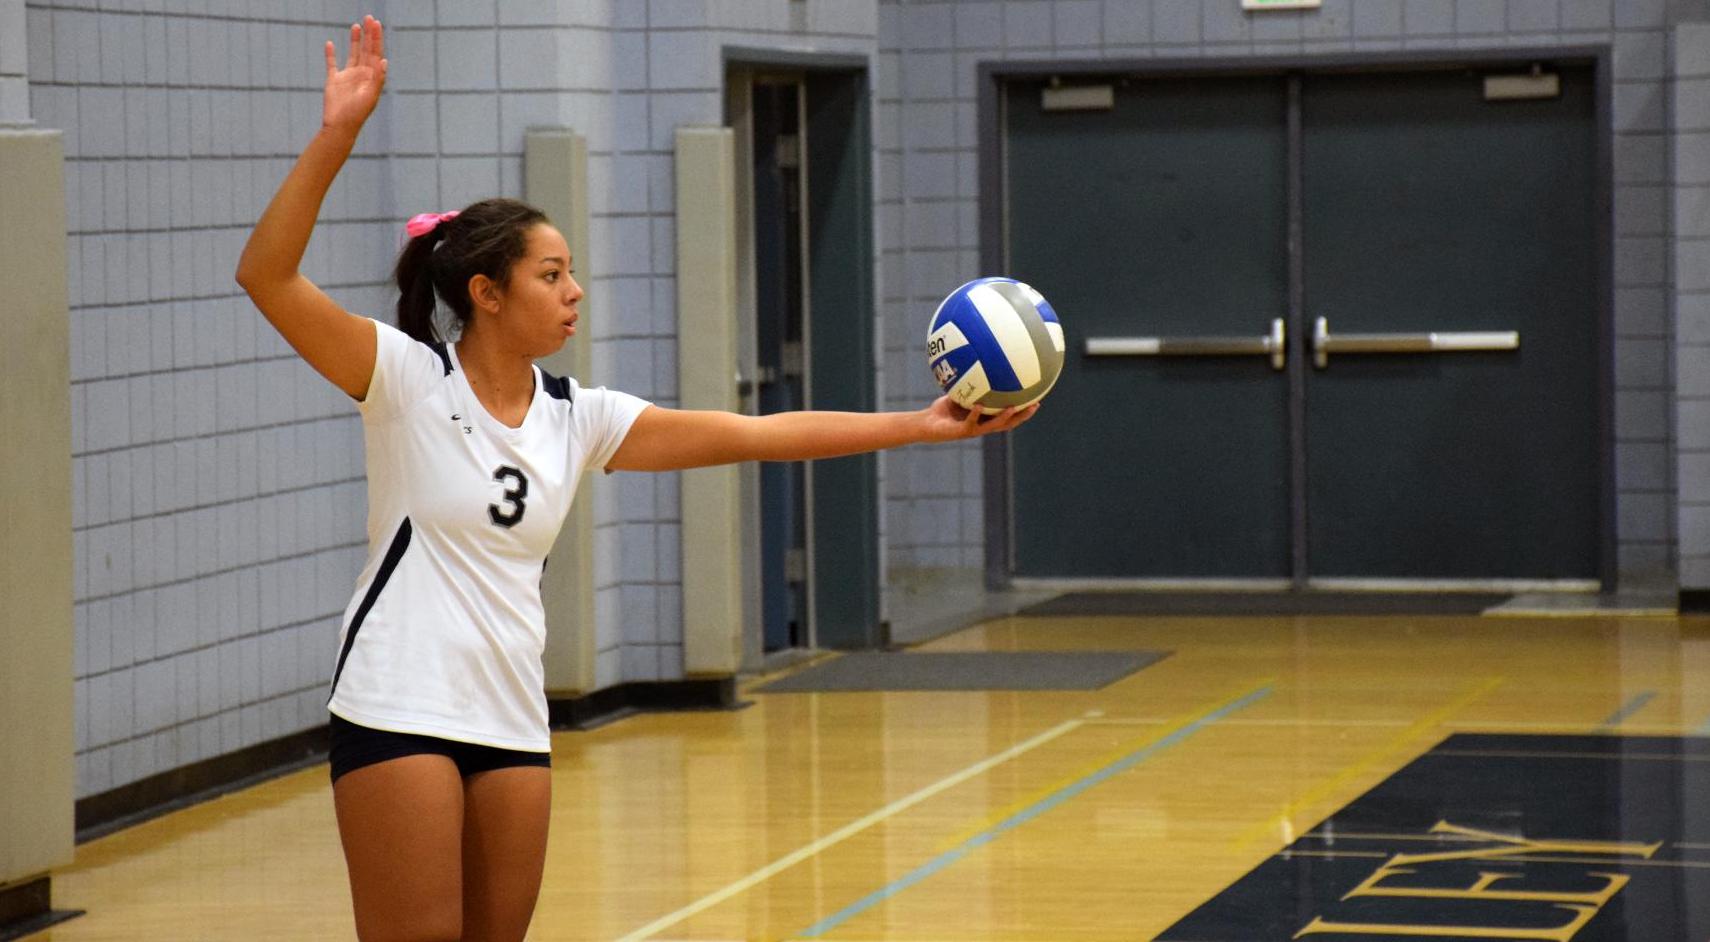 Women's volleyball team continues to roll, sweeps Orange Coast